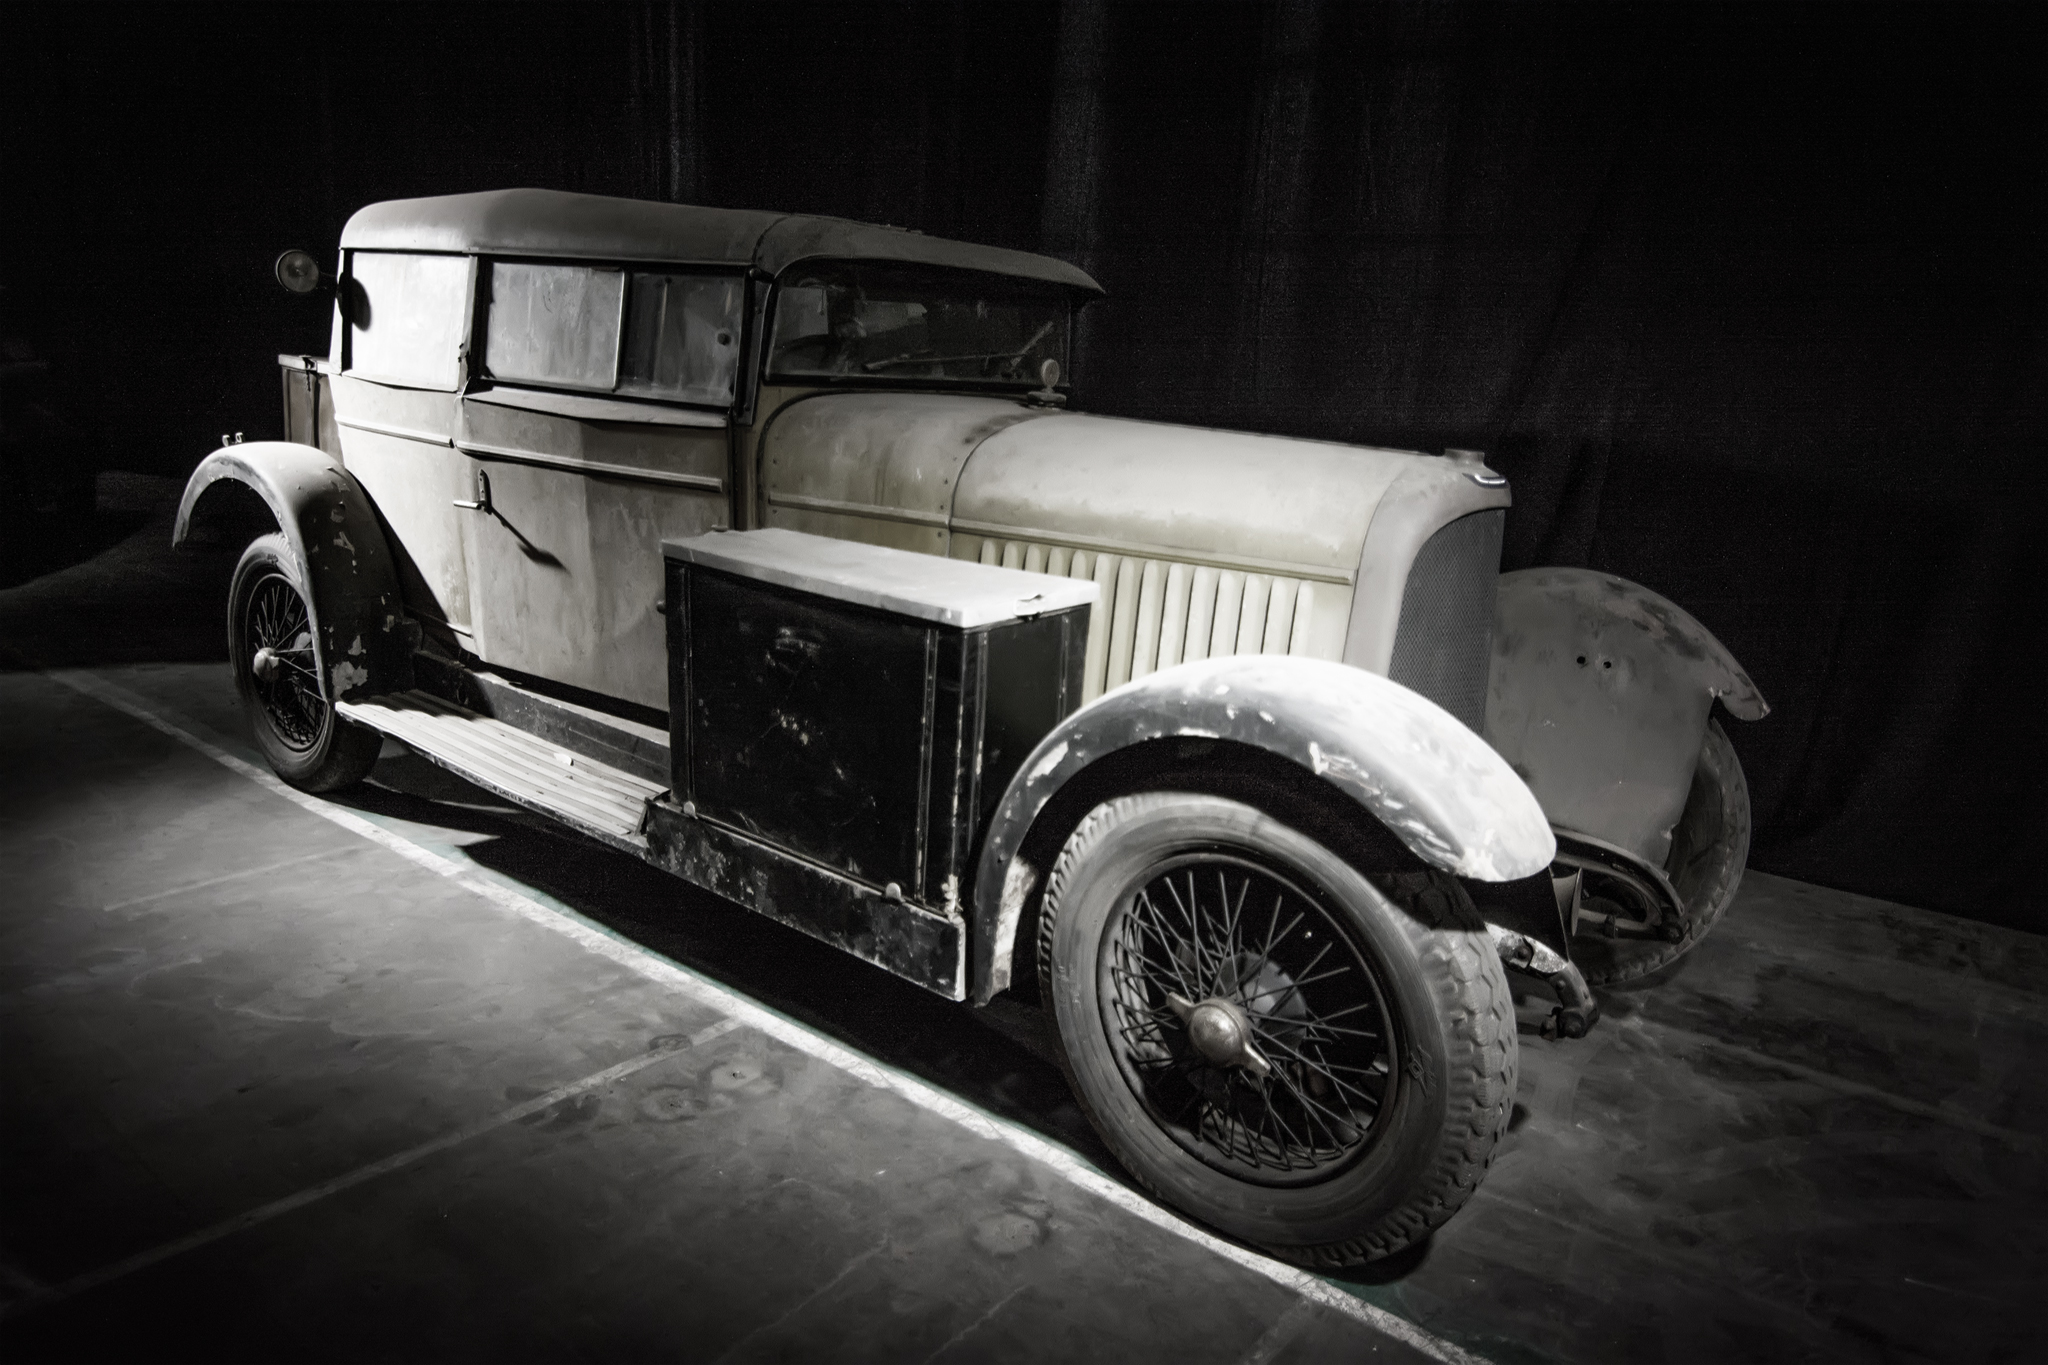 Unrestored car from the Mahy collection